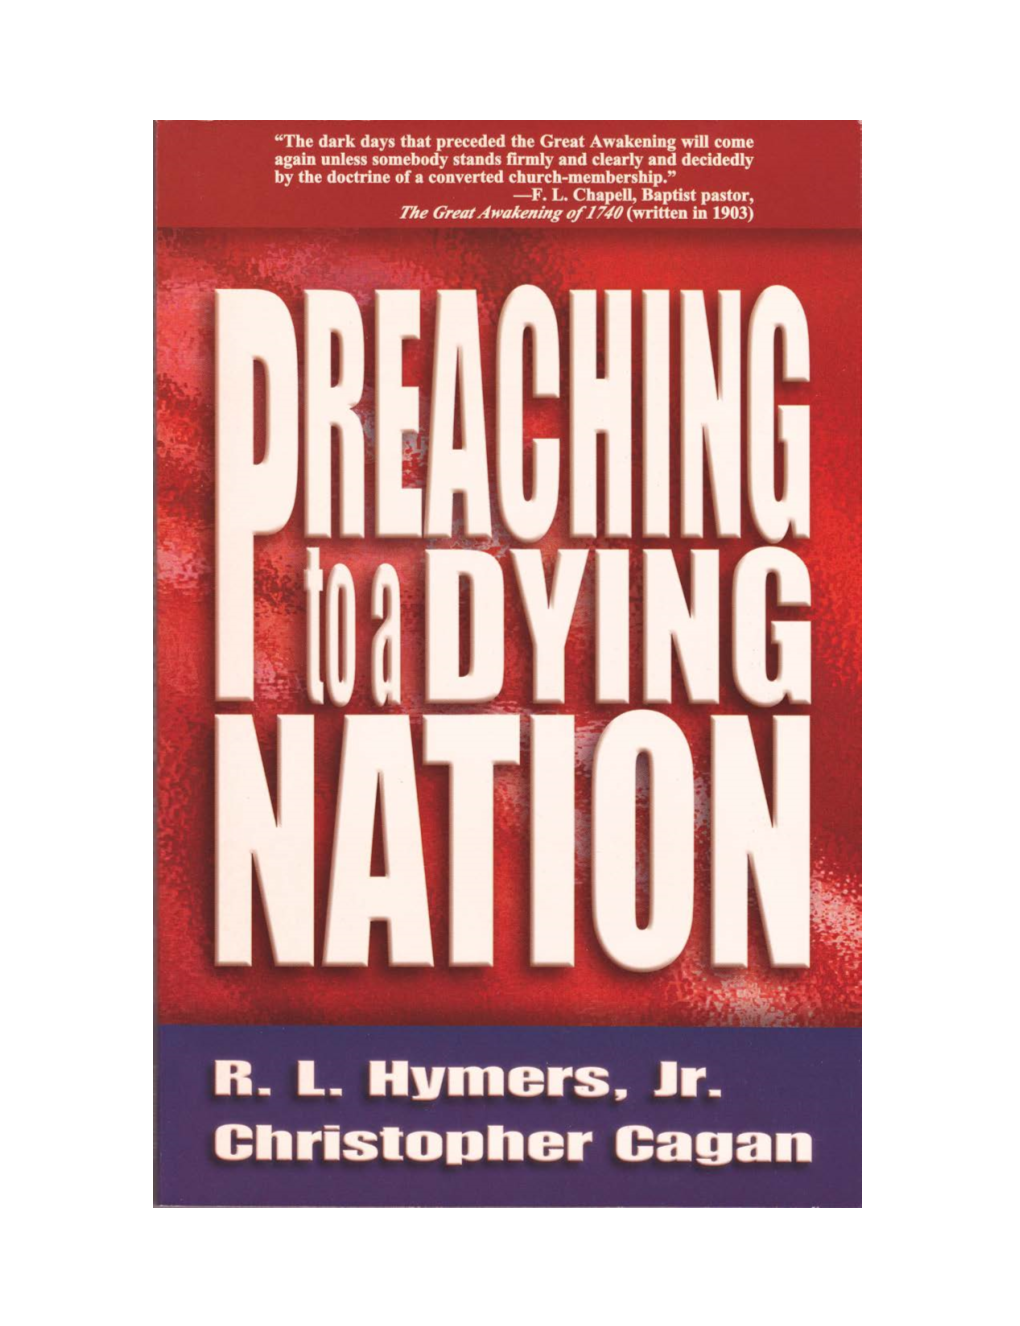 Preaching to a Dying Nation